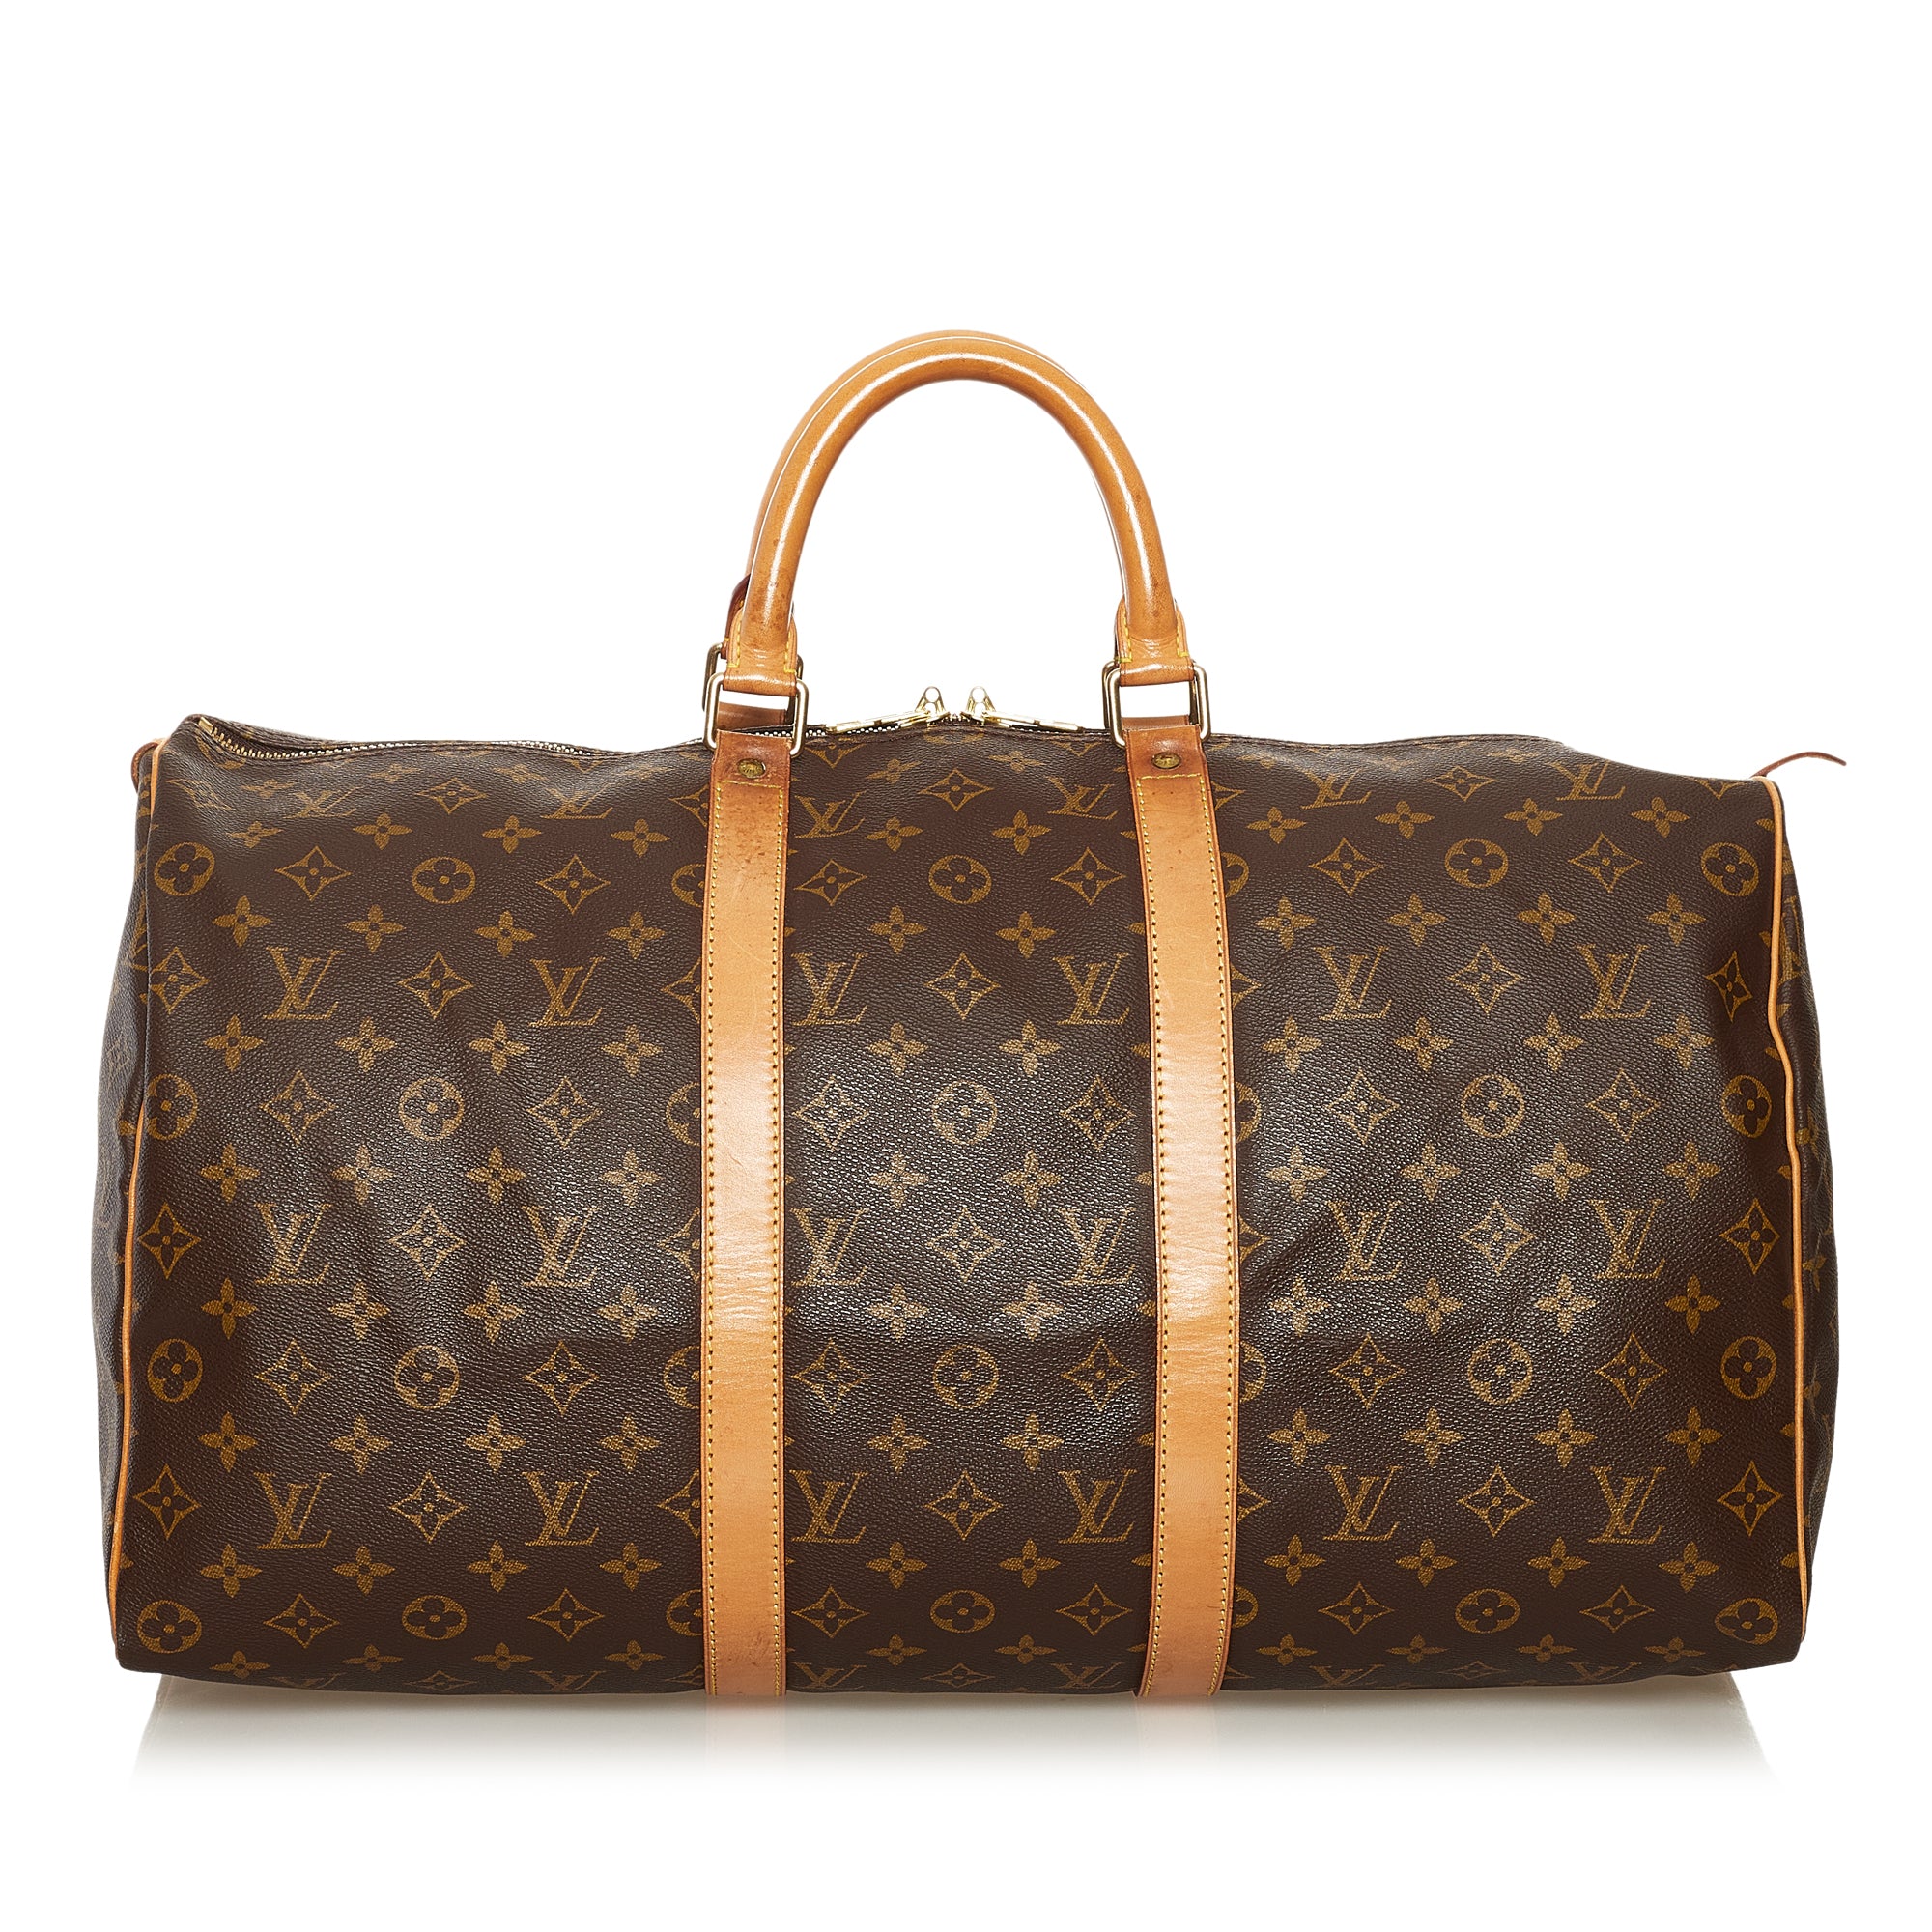 This Louis Vuitton Keepall 50 is the must have piece of the season